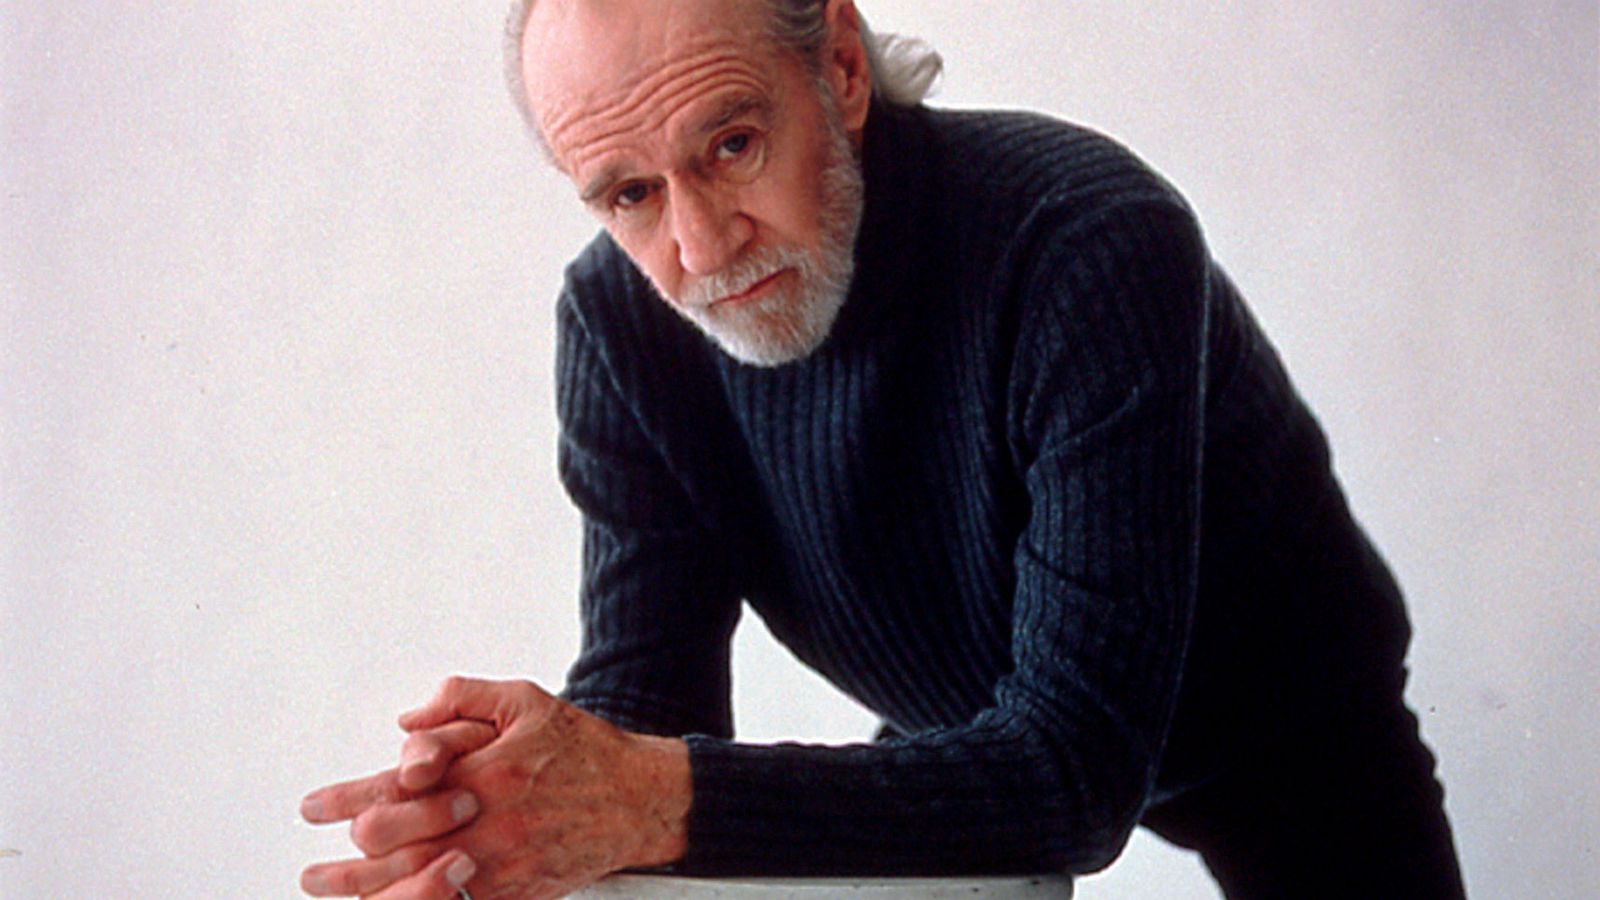 George Carlin’s comedic journey takes the stage in HBO doc